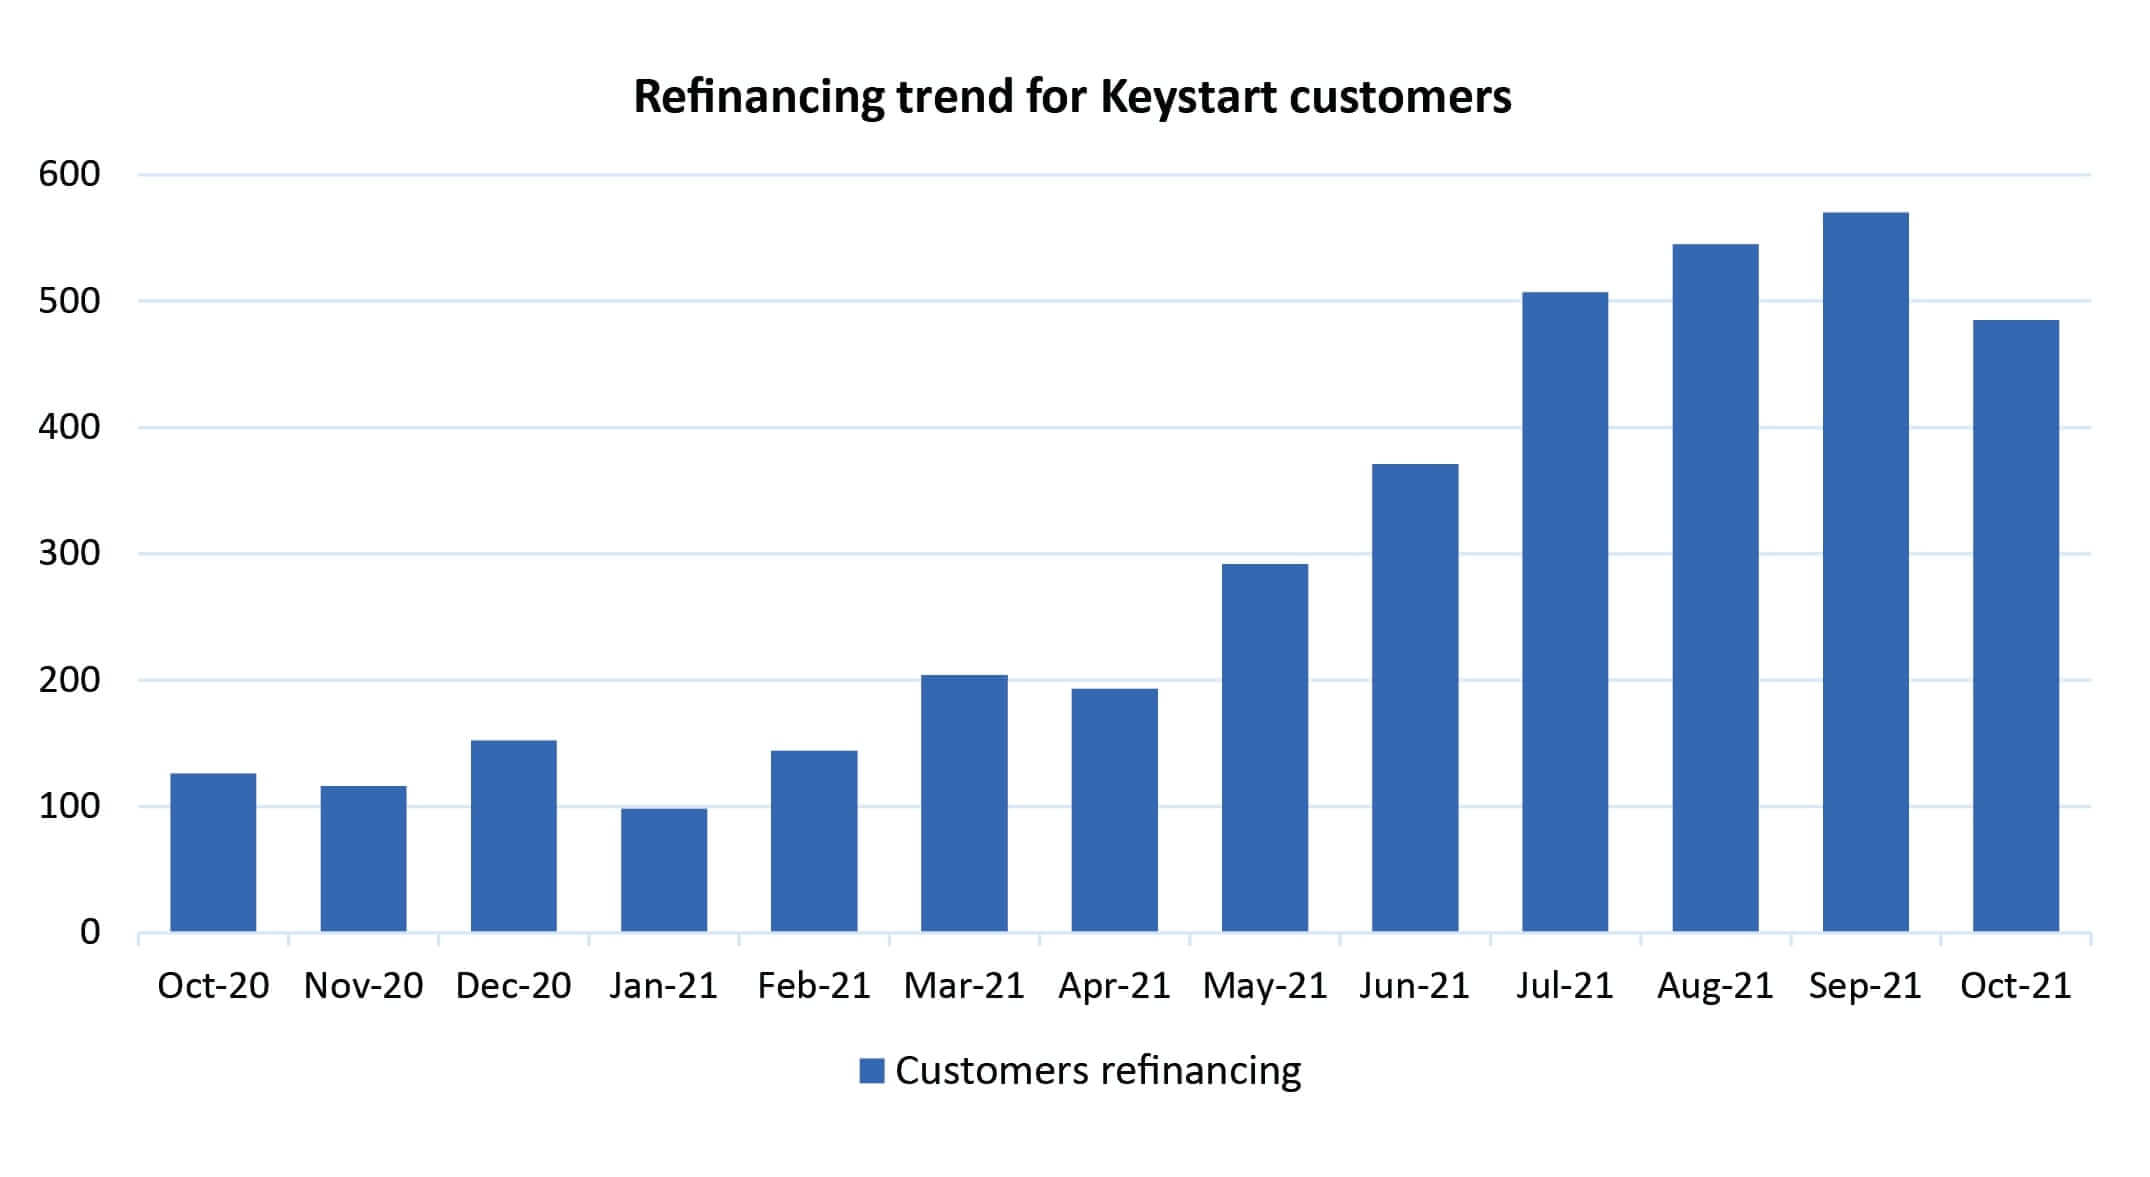 The-number-of-Keystart-customers-refinancing-has-increased-by-526-over-the-last-12-months